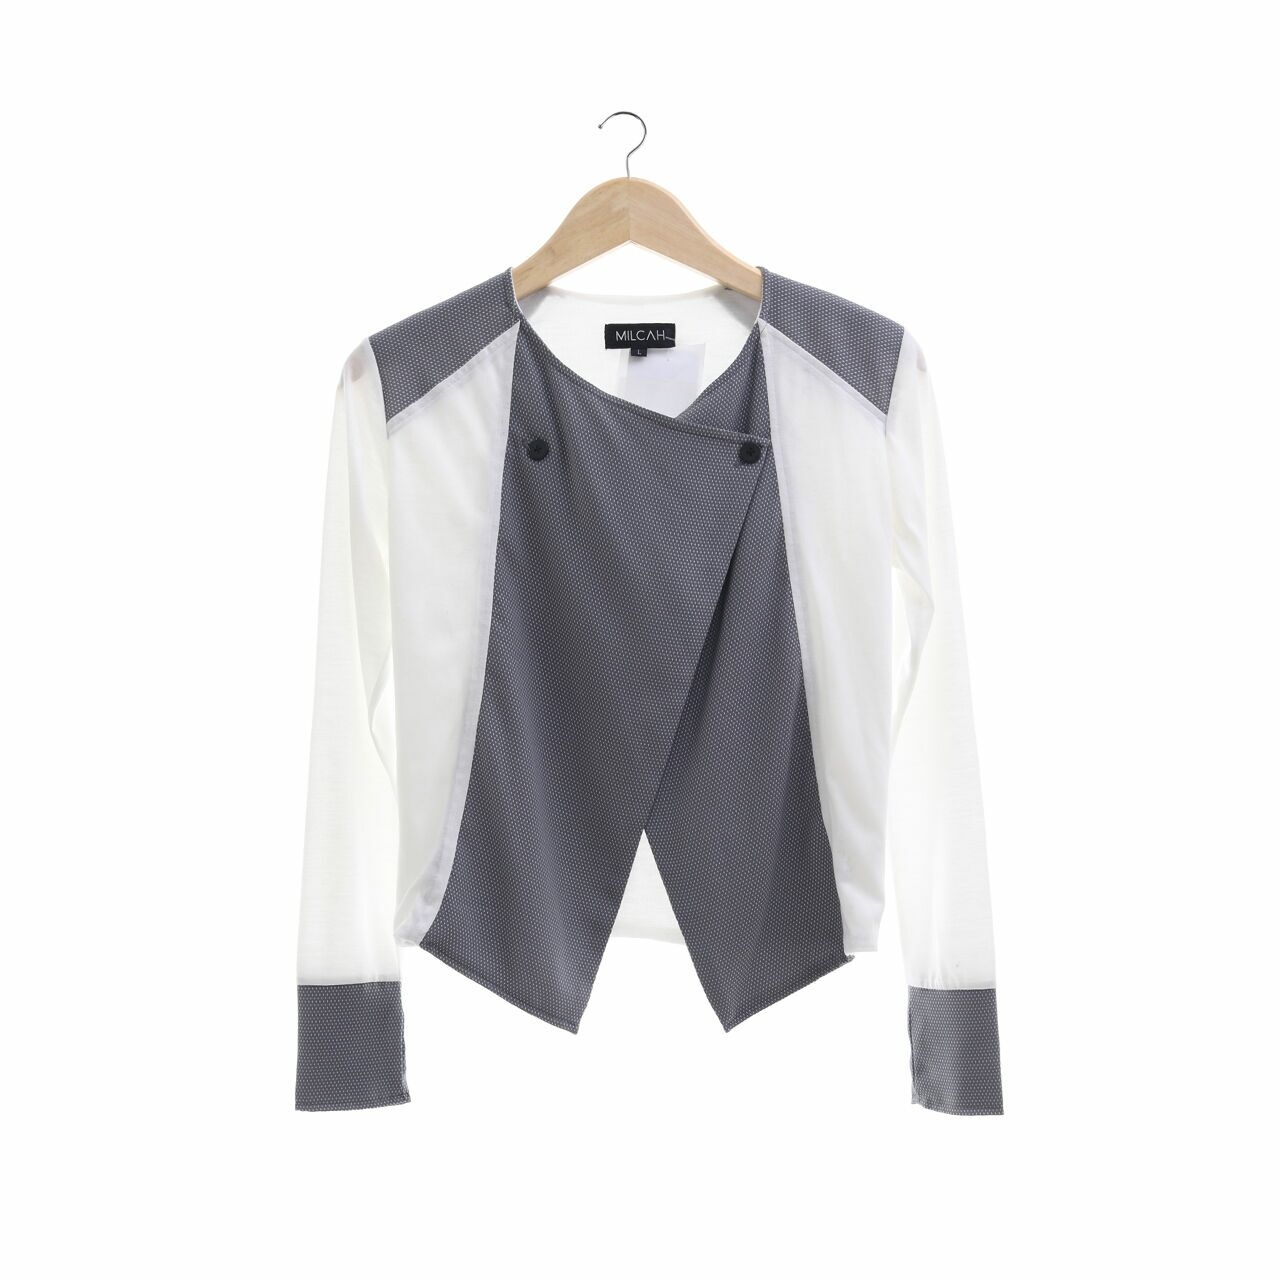 Milcah Off White & Grey Outerwear